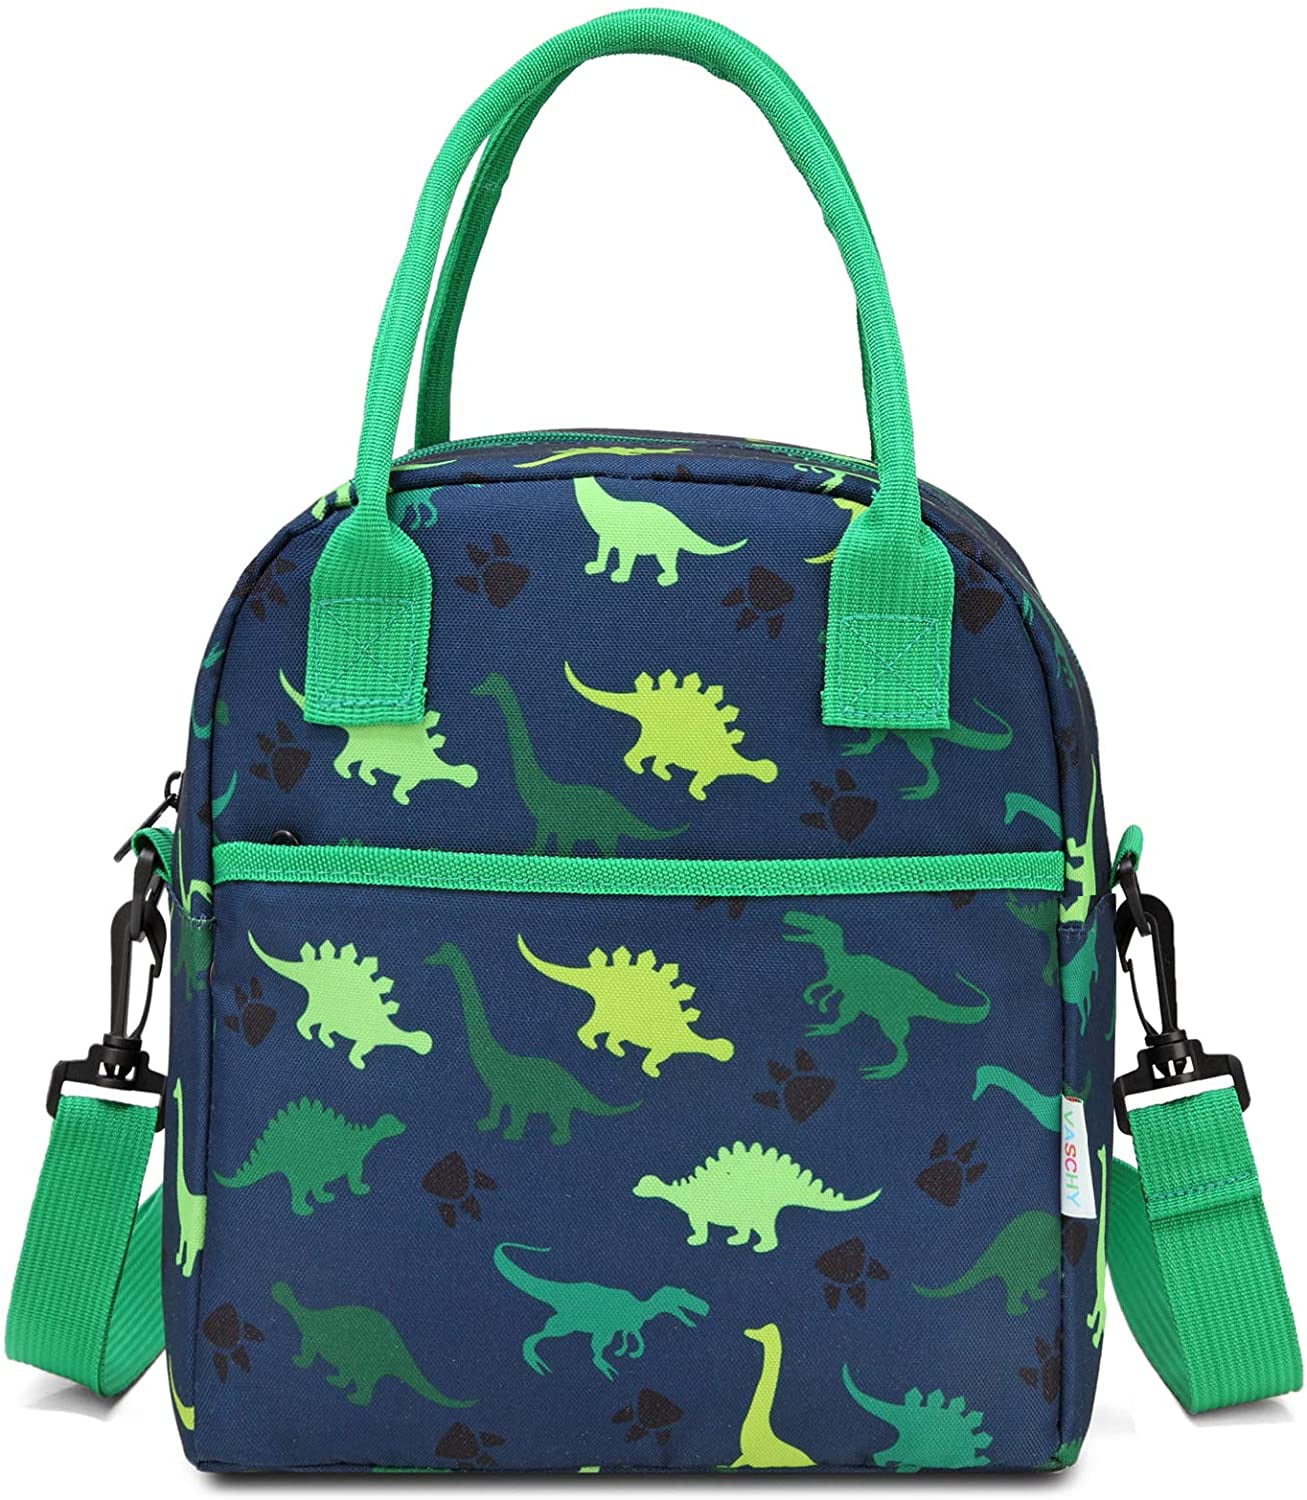 Details about   TUPPERWARE NEW UNICORN DESIGN LUNCH INSULATED BAG !!! 